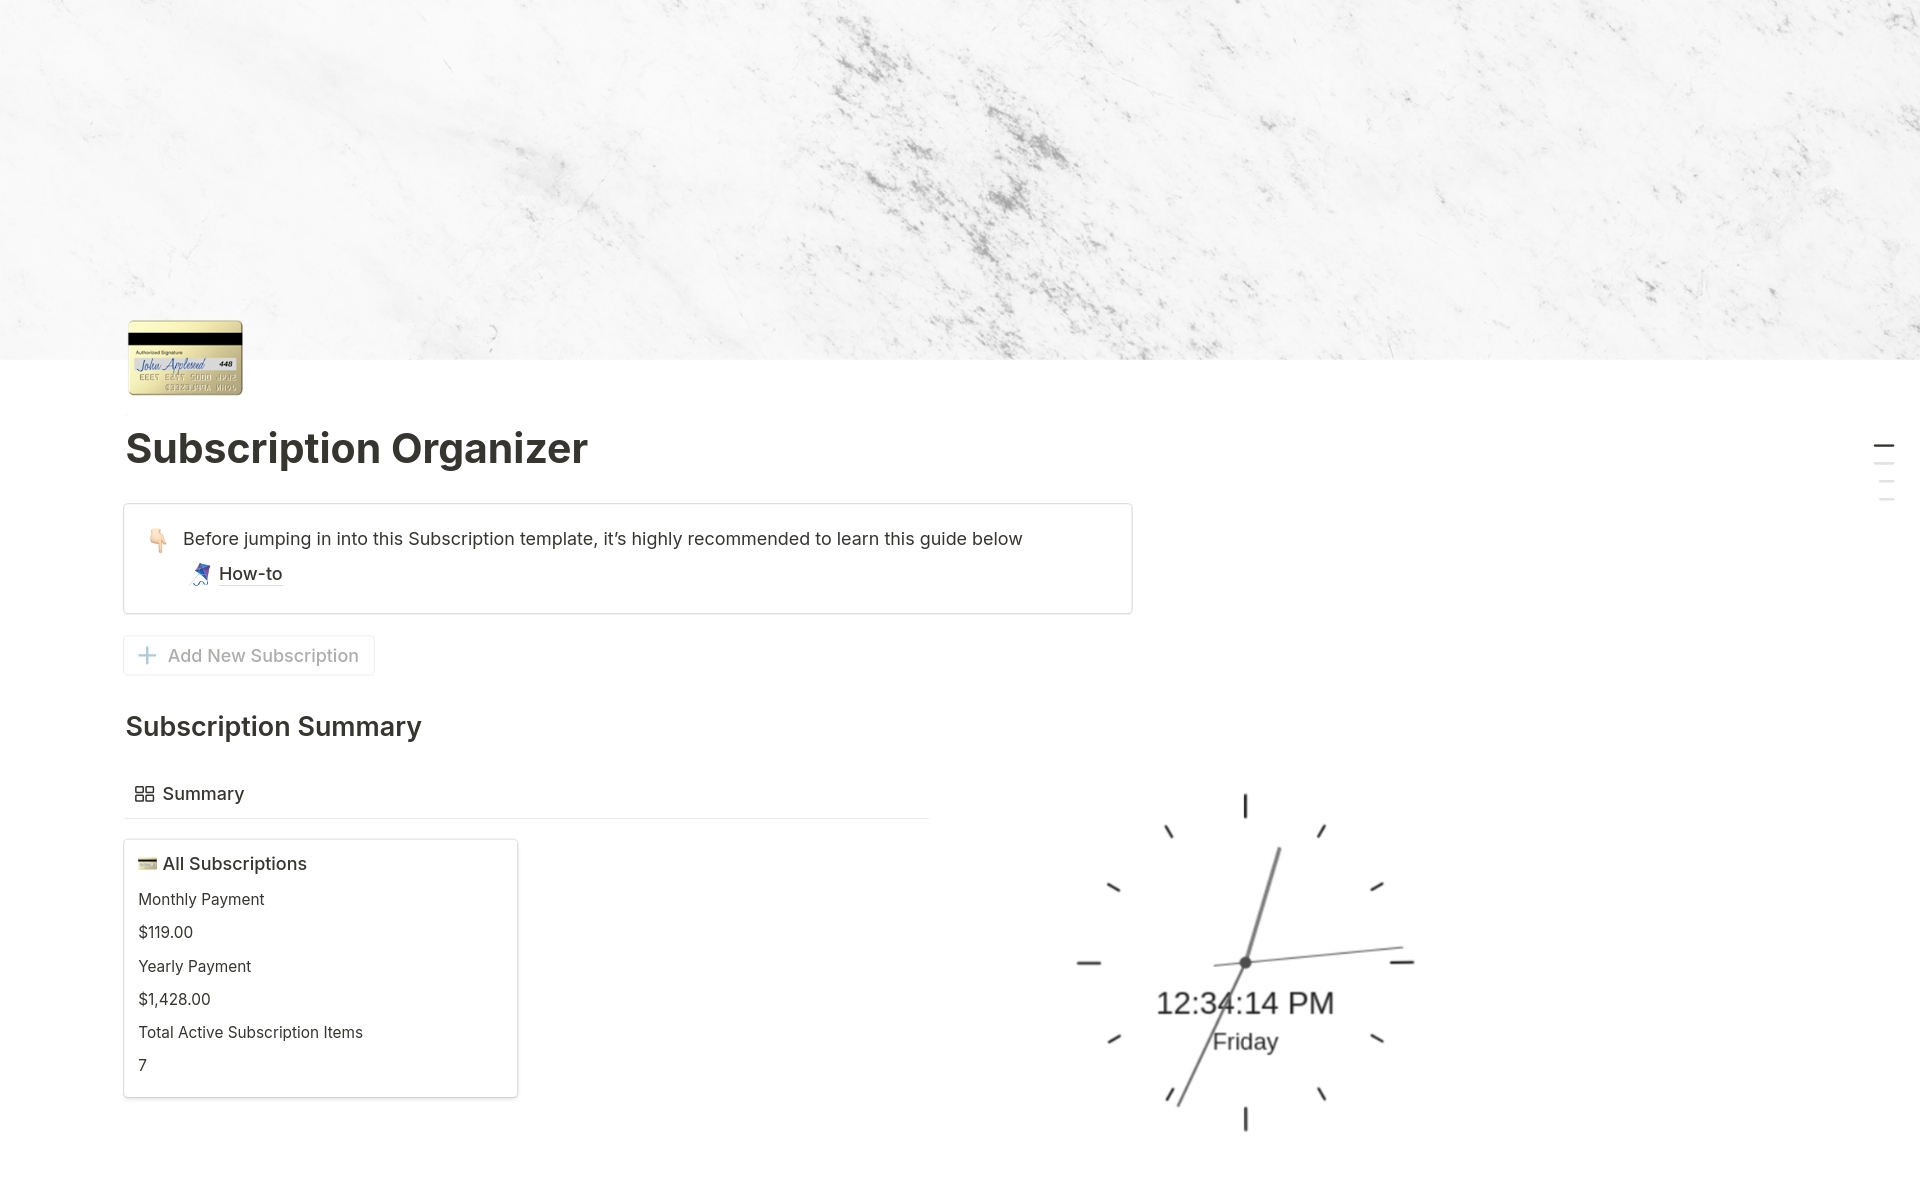 Notion Subscription Organiser template is designed to keep your subscriptions organized and acquire a better knowledge of your subscription spending habits.